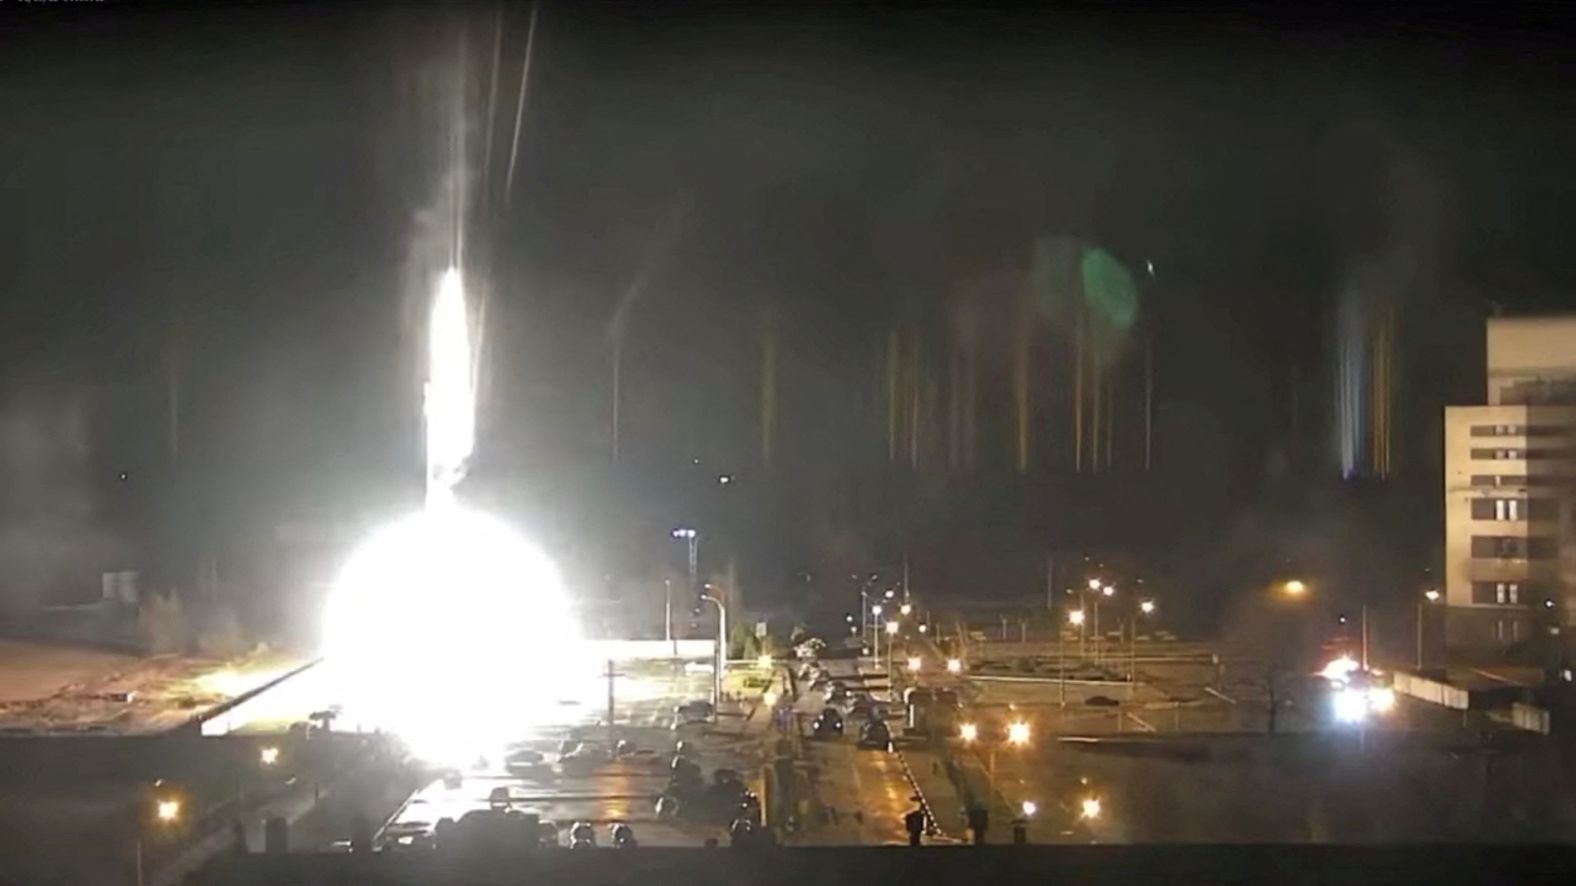 Surveillance camera footage shows a flare landing at the Zaporizhzhia nuclear power plant in Enerhodar, Ukraine, during shelling on March 4. Ukrainian authorities said <a href="index.php?page=&url=https%3A%2F%2Fwww.cnn.com%2F2022%2F03%2F03%2Feurope%2Fzaporizhzhia-nuclear-power-plant-fire-ukraine-intl-hnk%2Findex.html" target="_blank">Russian forces have "occupied" the power plant.</a>